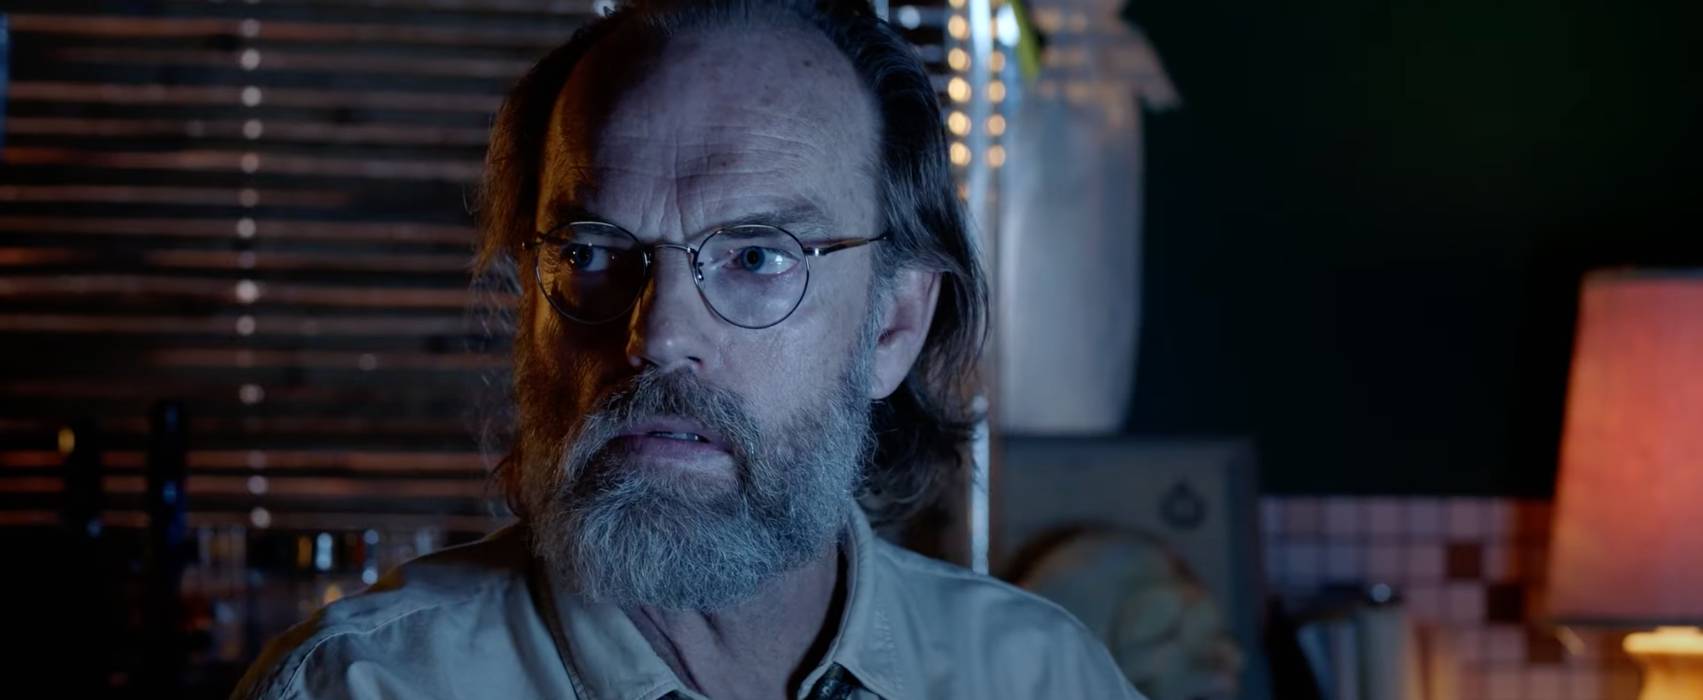 Hugo Weaving Is A Creepy Reclusive Scientist In New Sci-Fi Expired